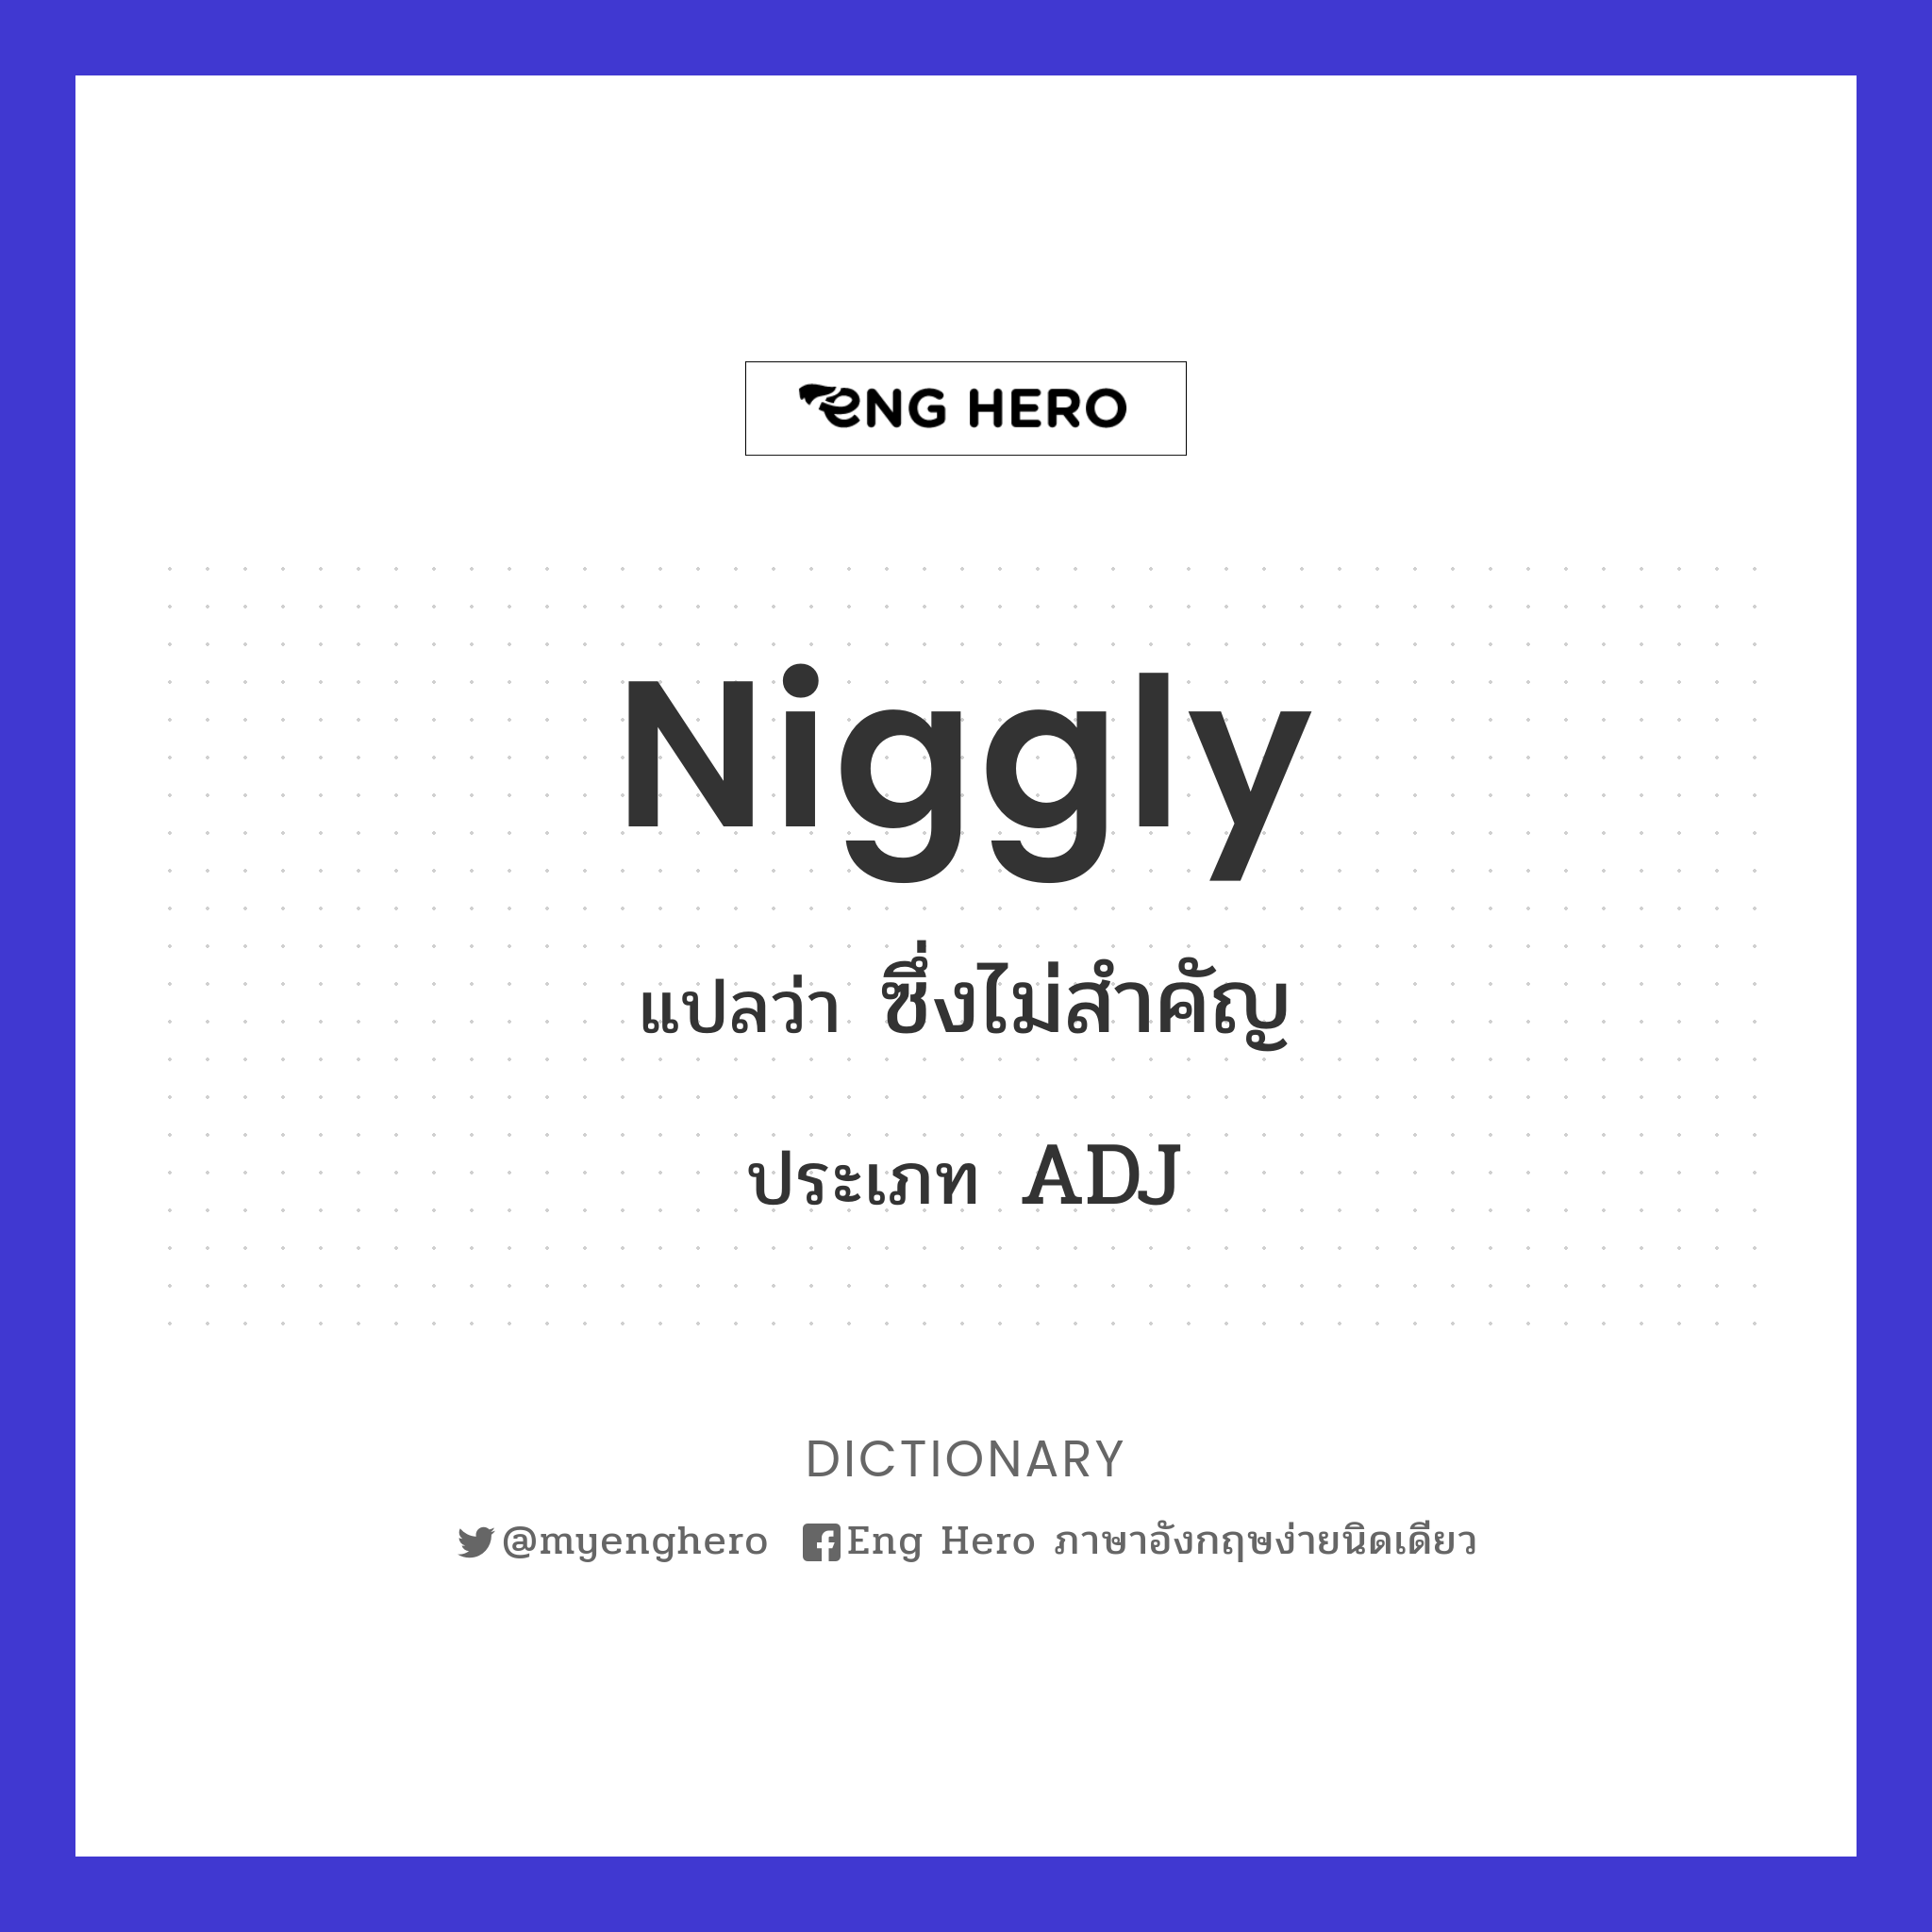 niggly